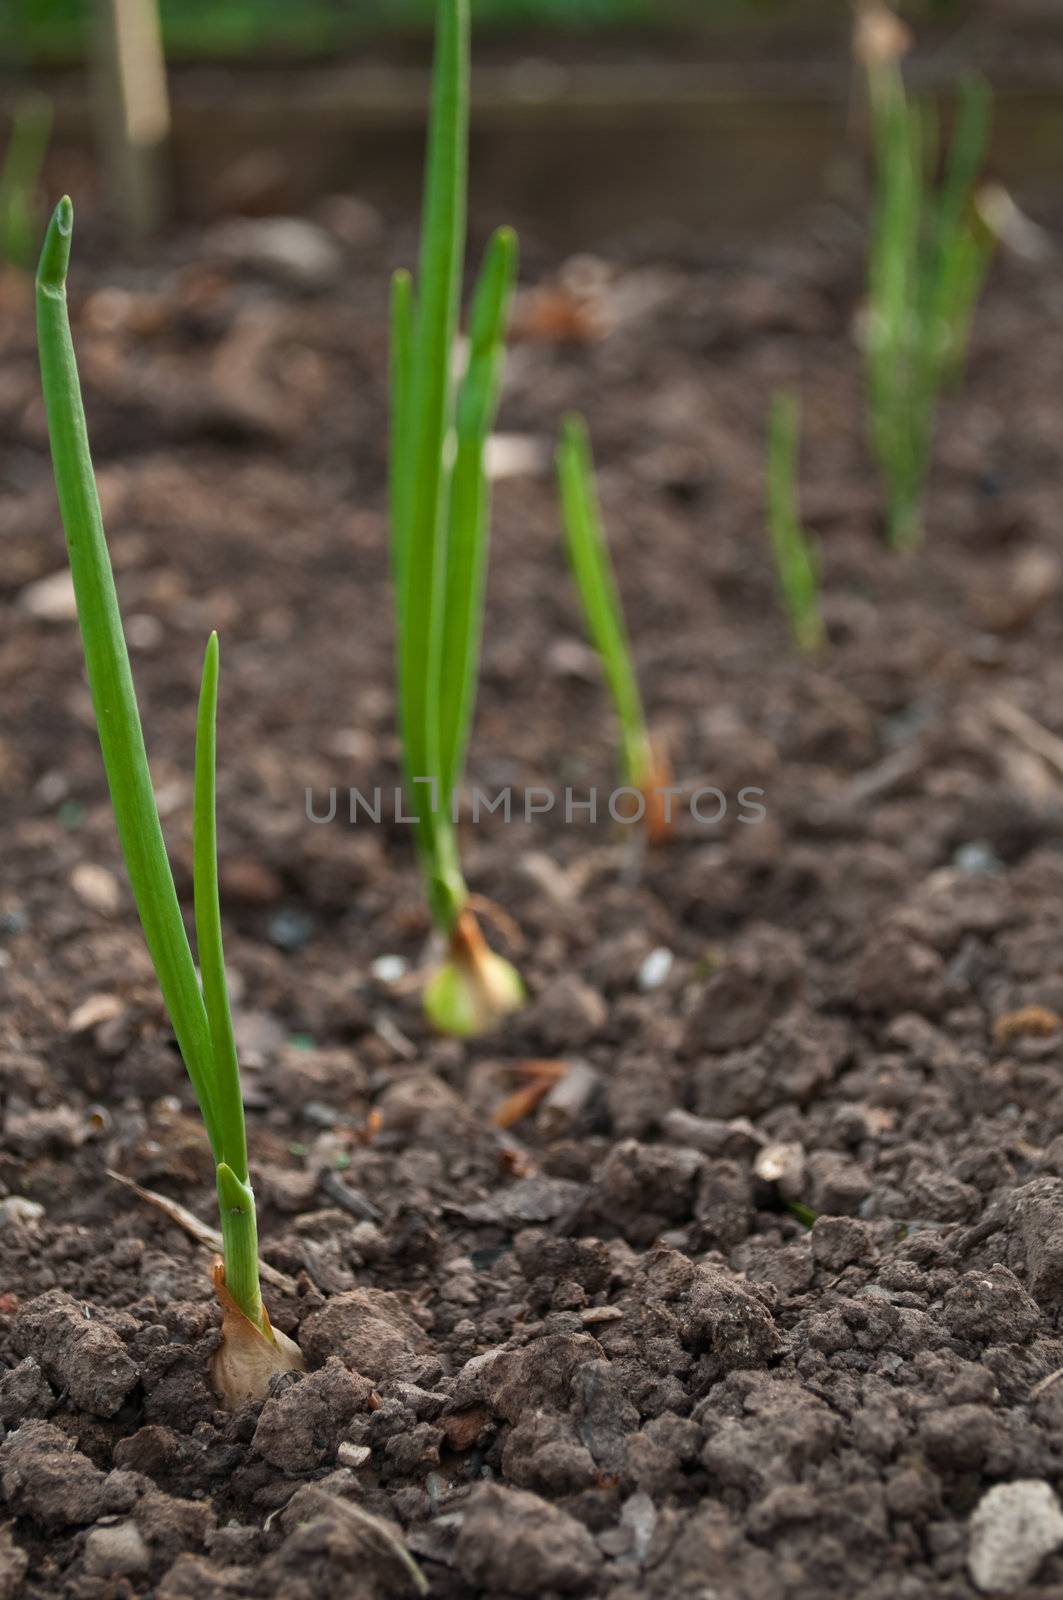 Organic young onions growing in vegetable patch setting. Foreground onion in focus.